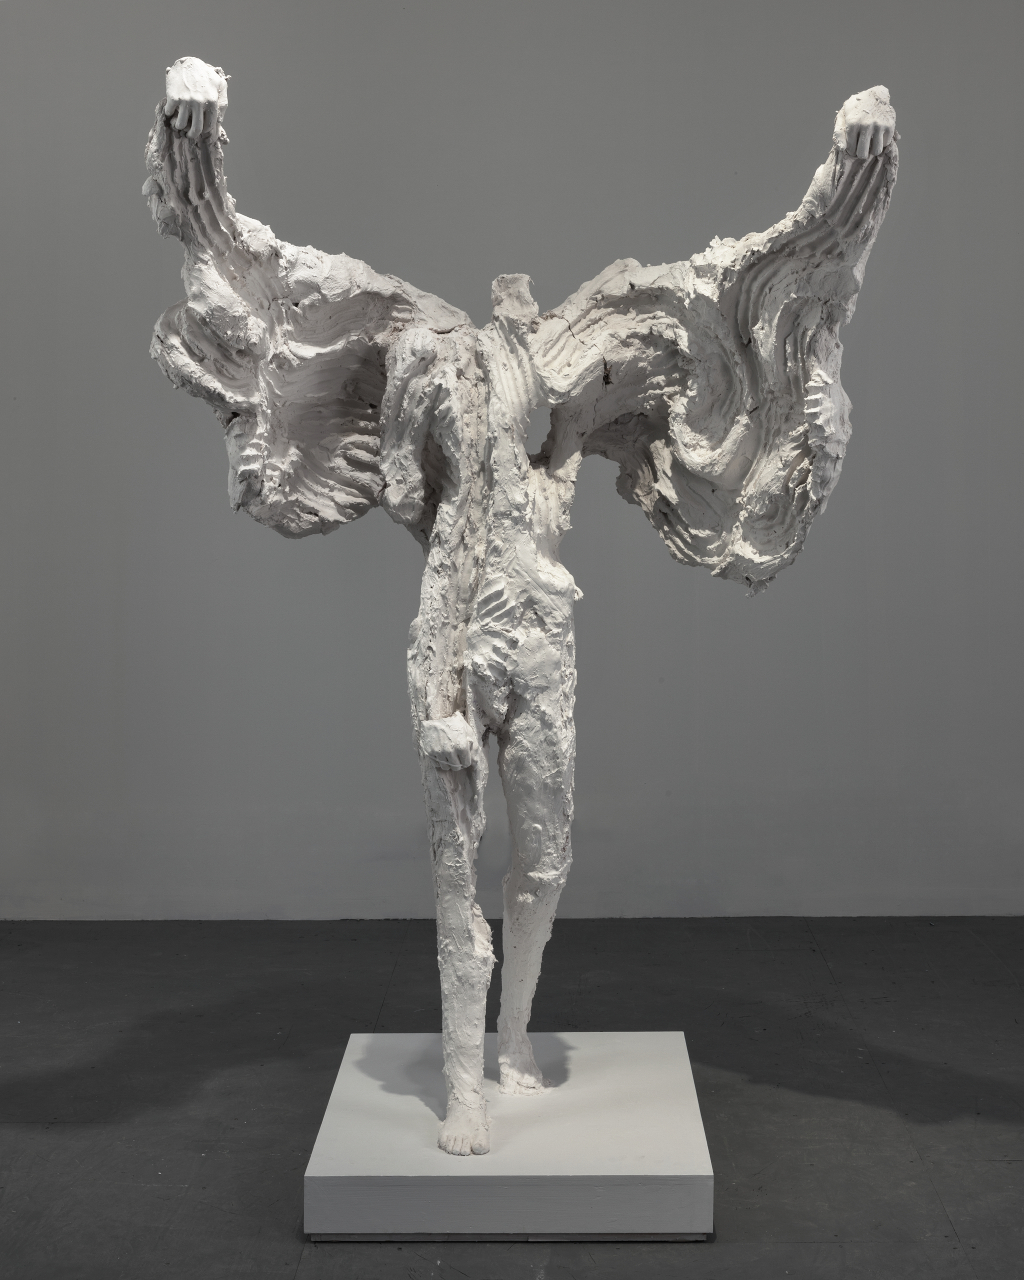 White Cube - Artists - David Altmejd